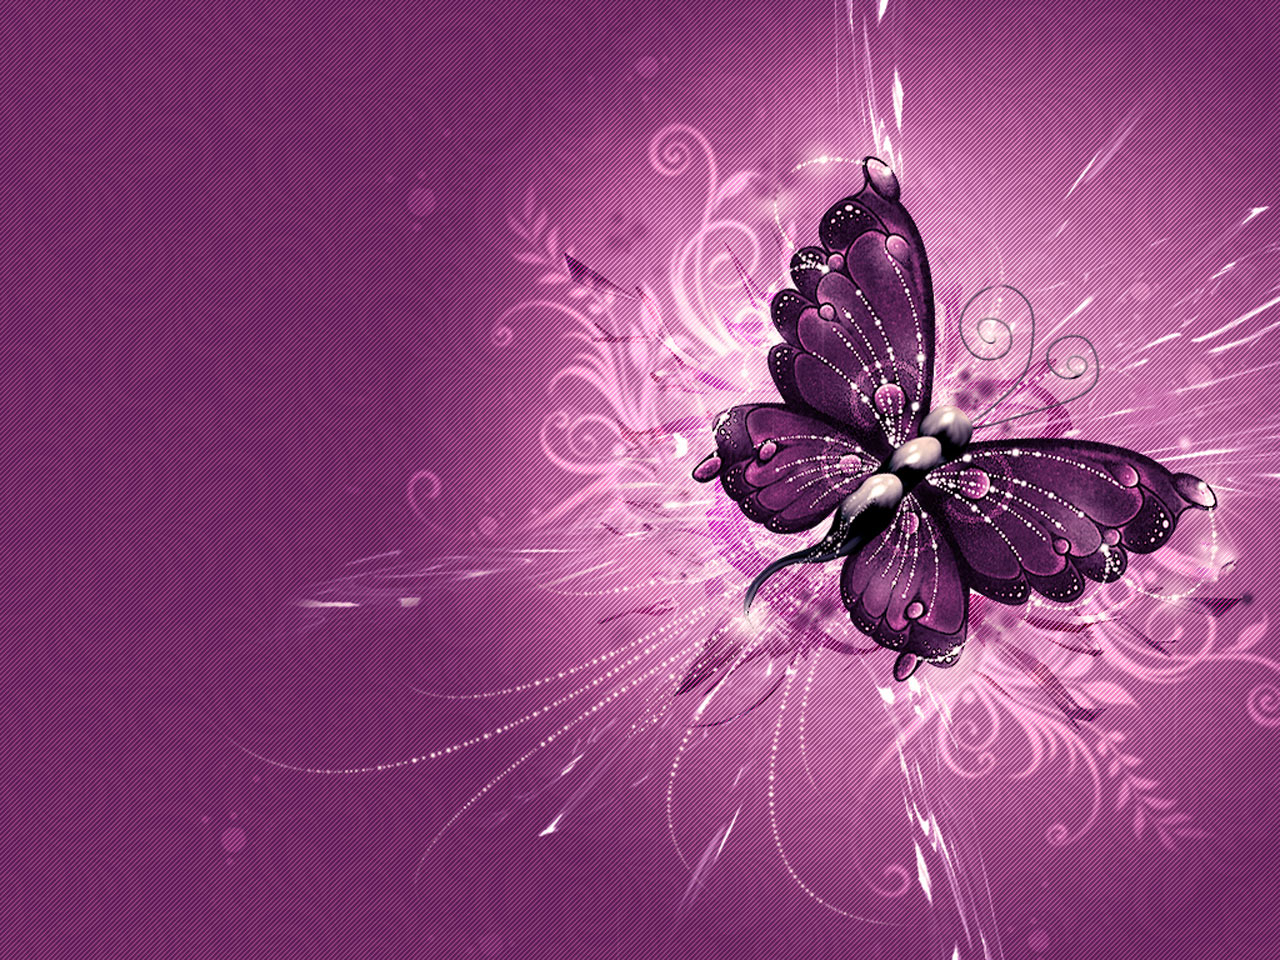  free Get Wallpaper Purple and make this wallpaper for your desktop